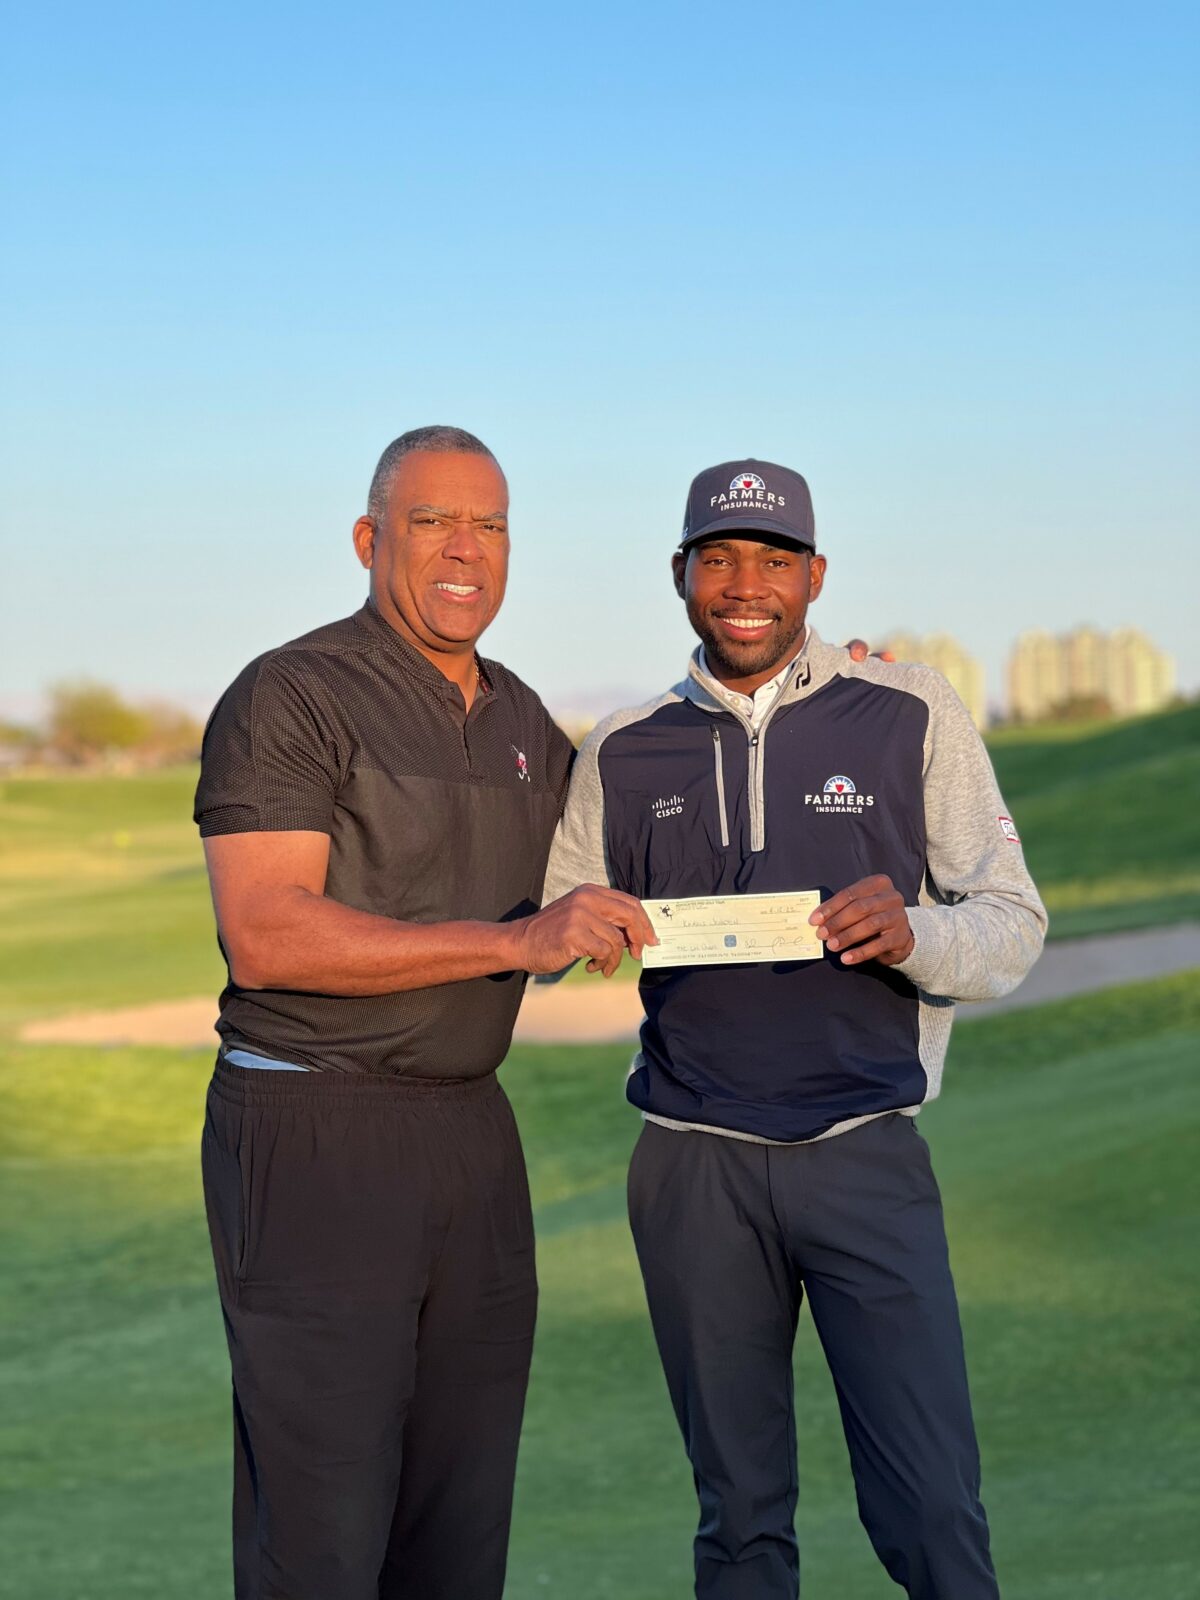 Kamaiu Johnson wins APGA Tour stop at TPC Las Vegas for second year in a row